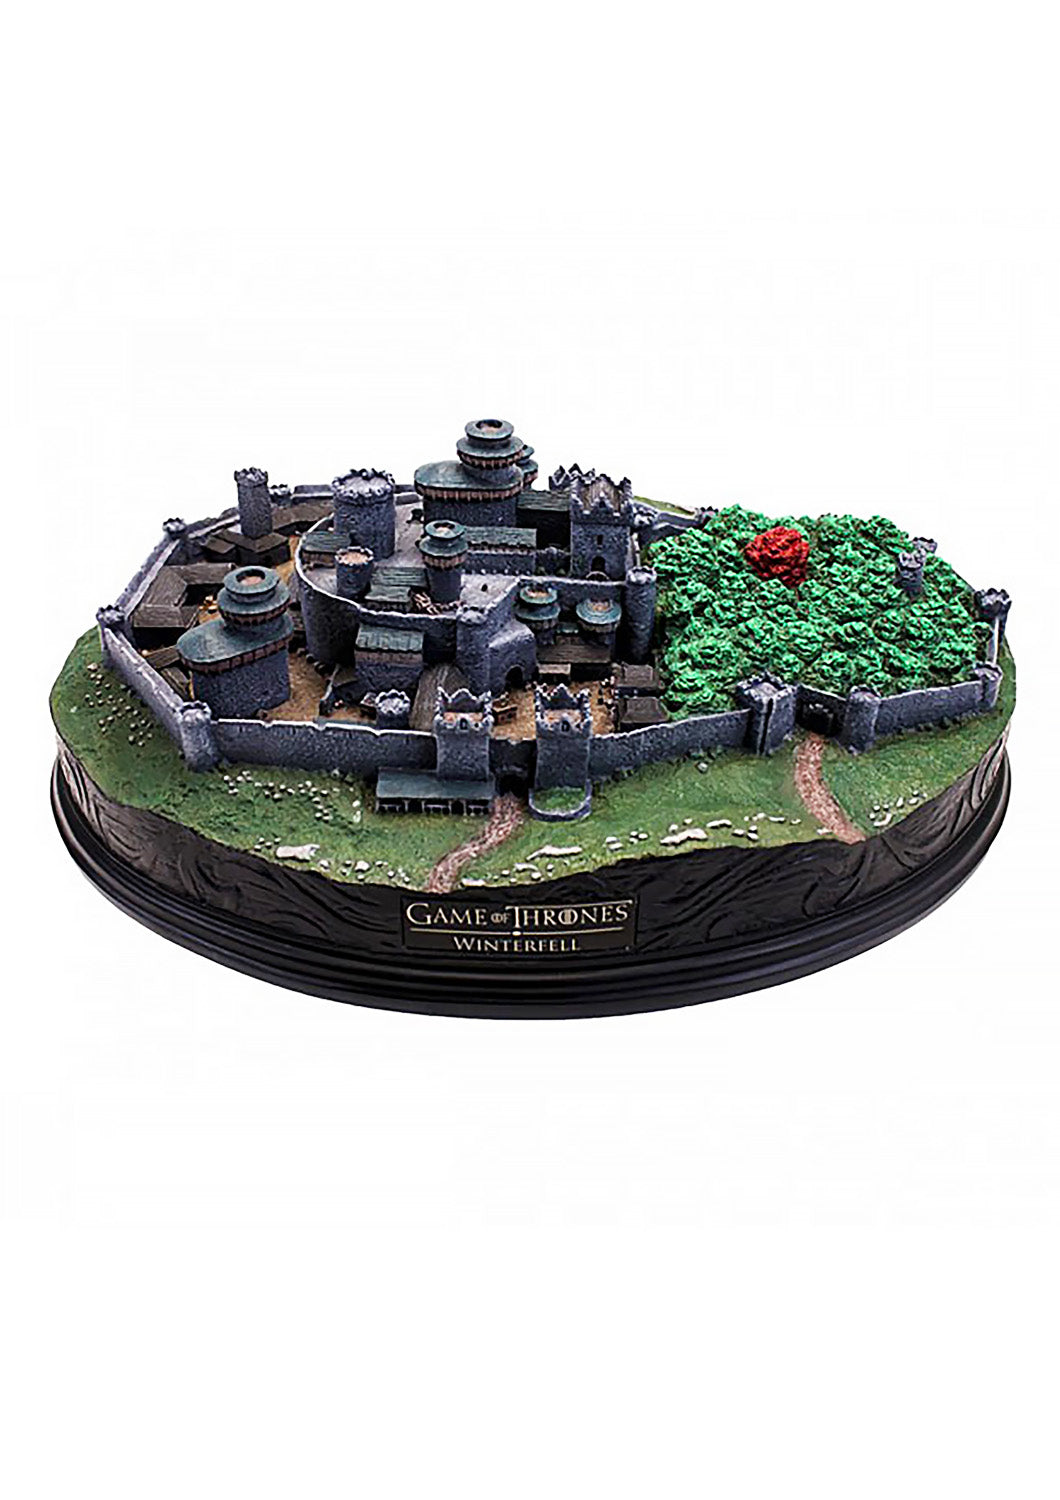 FACTORY ENTERTAINMENT GAME OF THRONES WINTERFELL CASTLE SCULPTURE - 408809 - Anotoys Collectibles